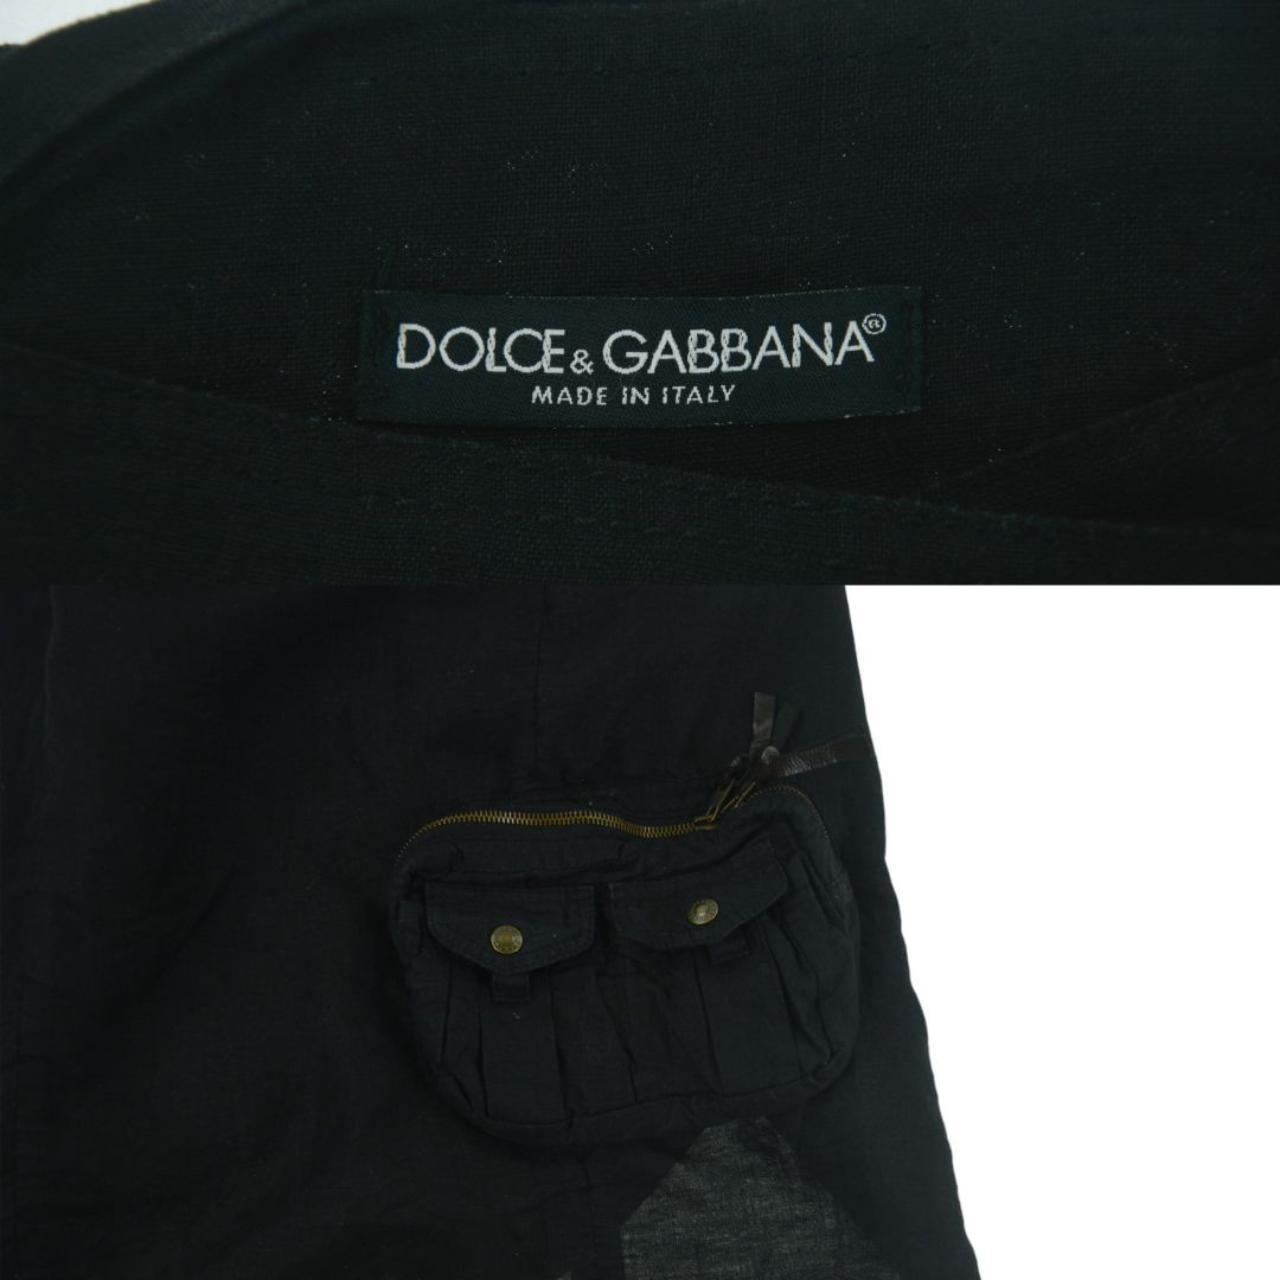 Vintage Dolce and Gabbana Multi Pocket Wrap Skirt Size W28 - Known Source